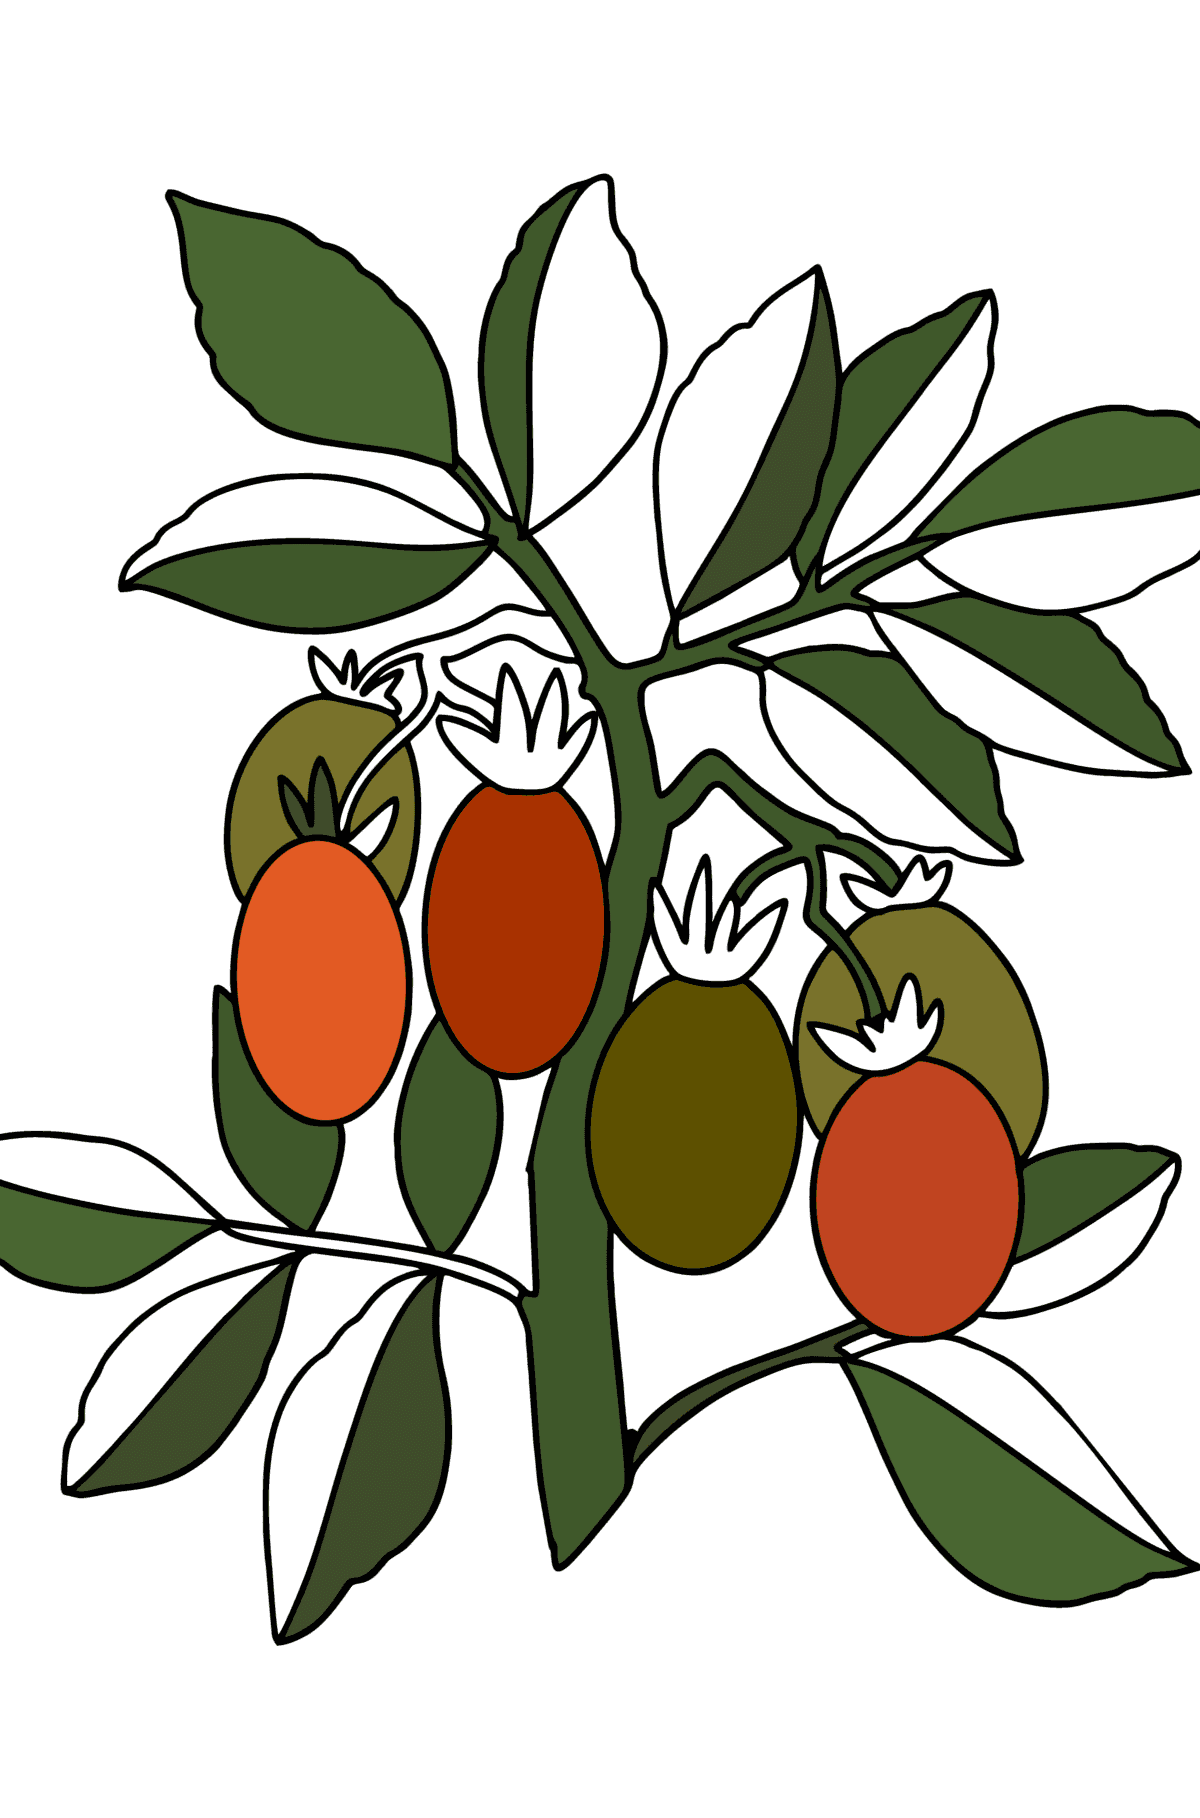 Tomatoes grow сoloring page - Coloring Pages for Kids